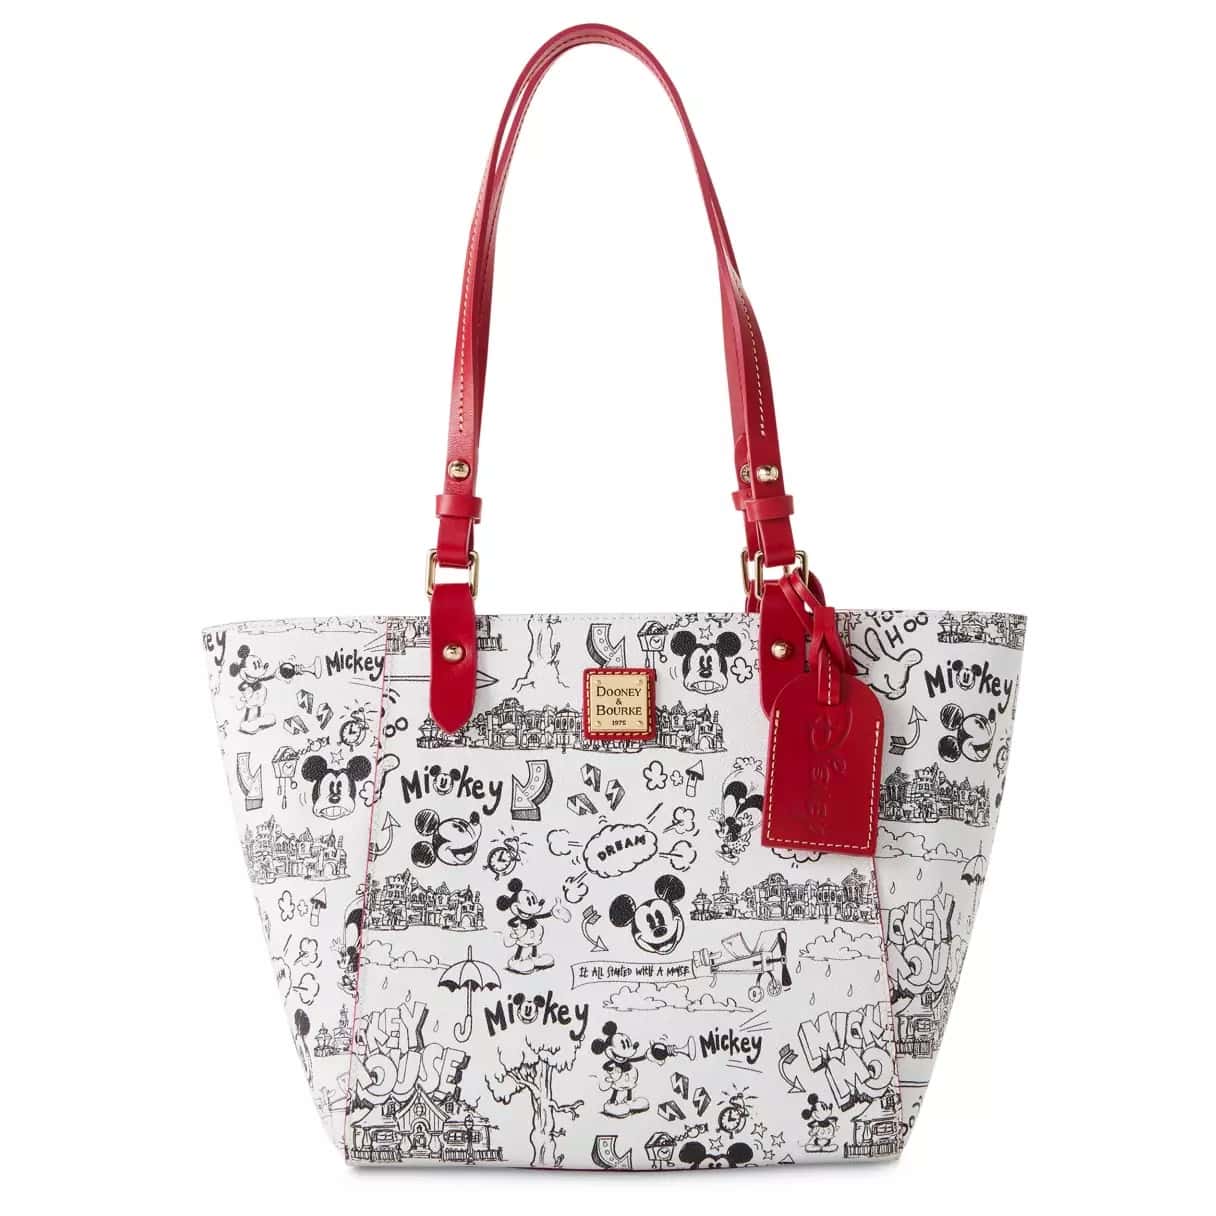 Disney Dooney & Bourke Bag - Mickey Mouse and Friends Germany - Tote Bag